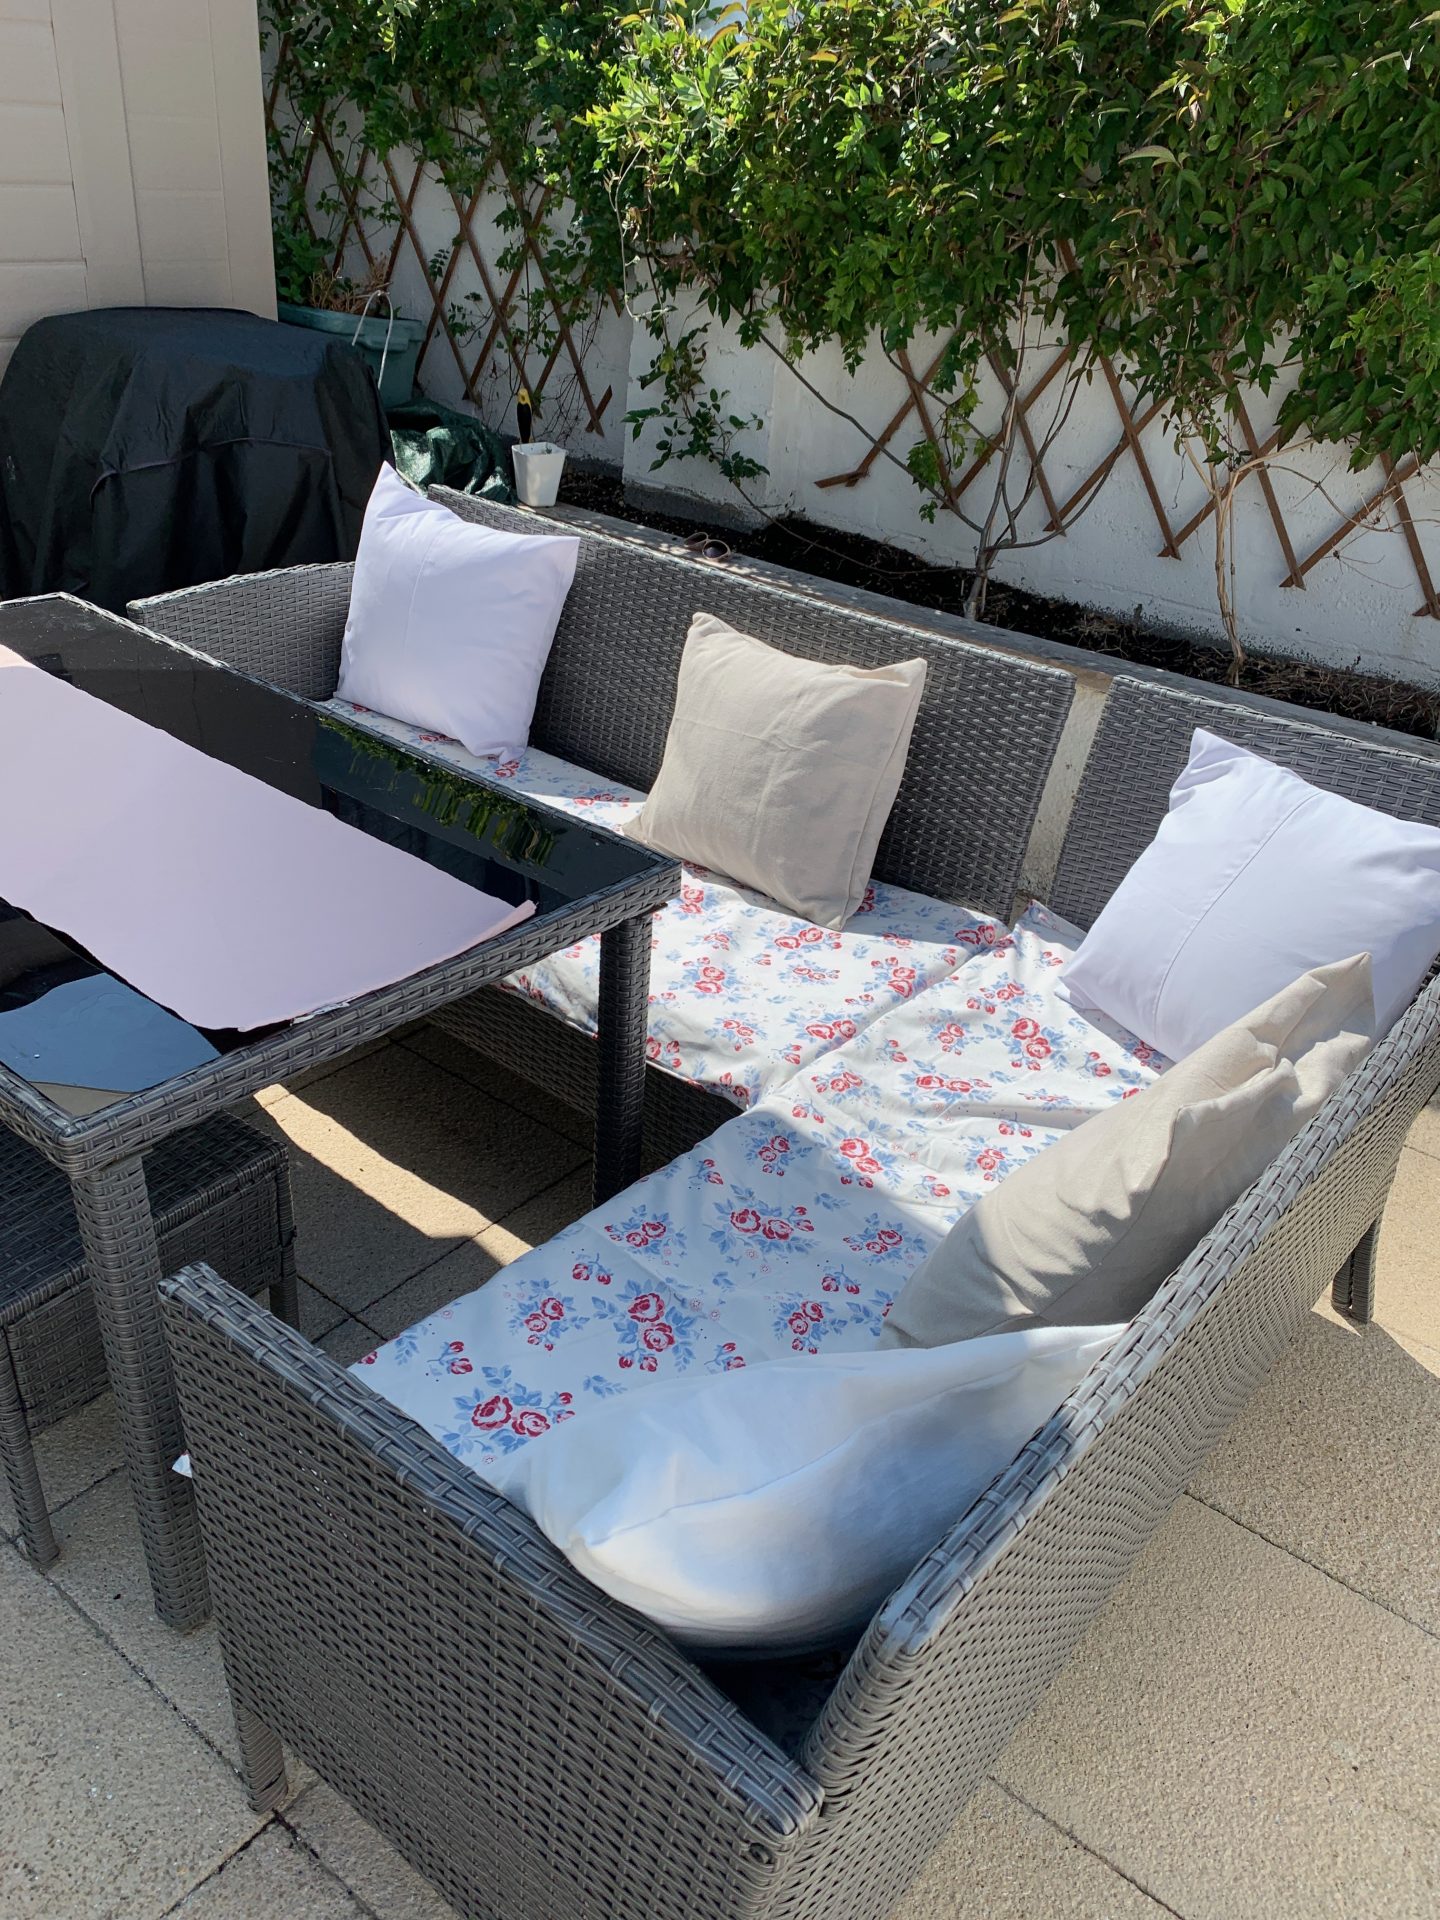 outdoor sofa set with handmade seat pads and cushion covers in a floral fabric.